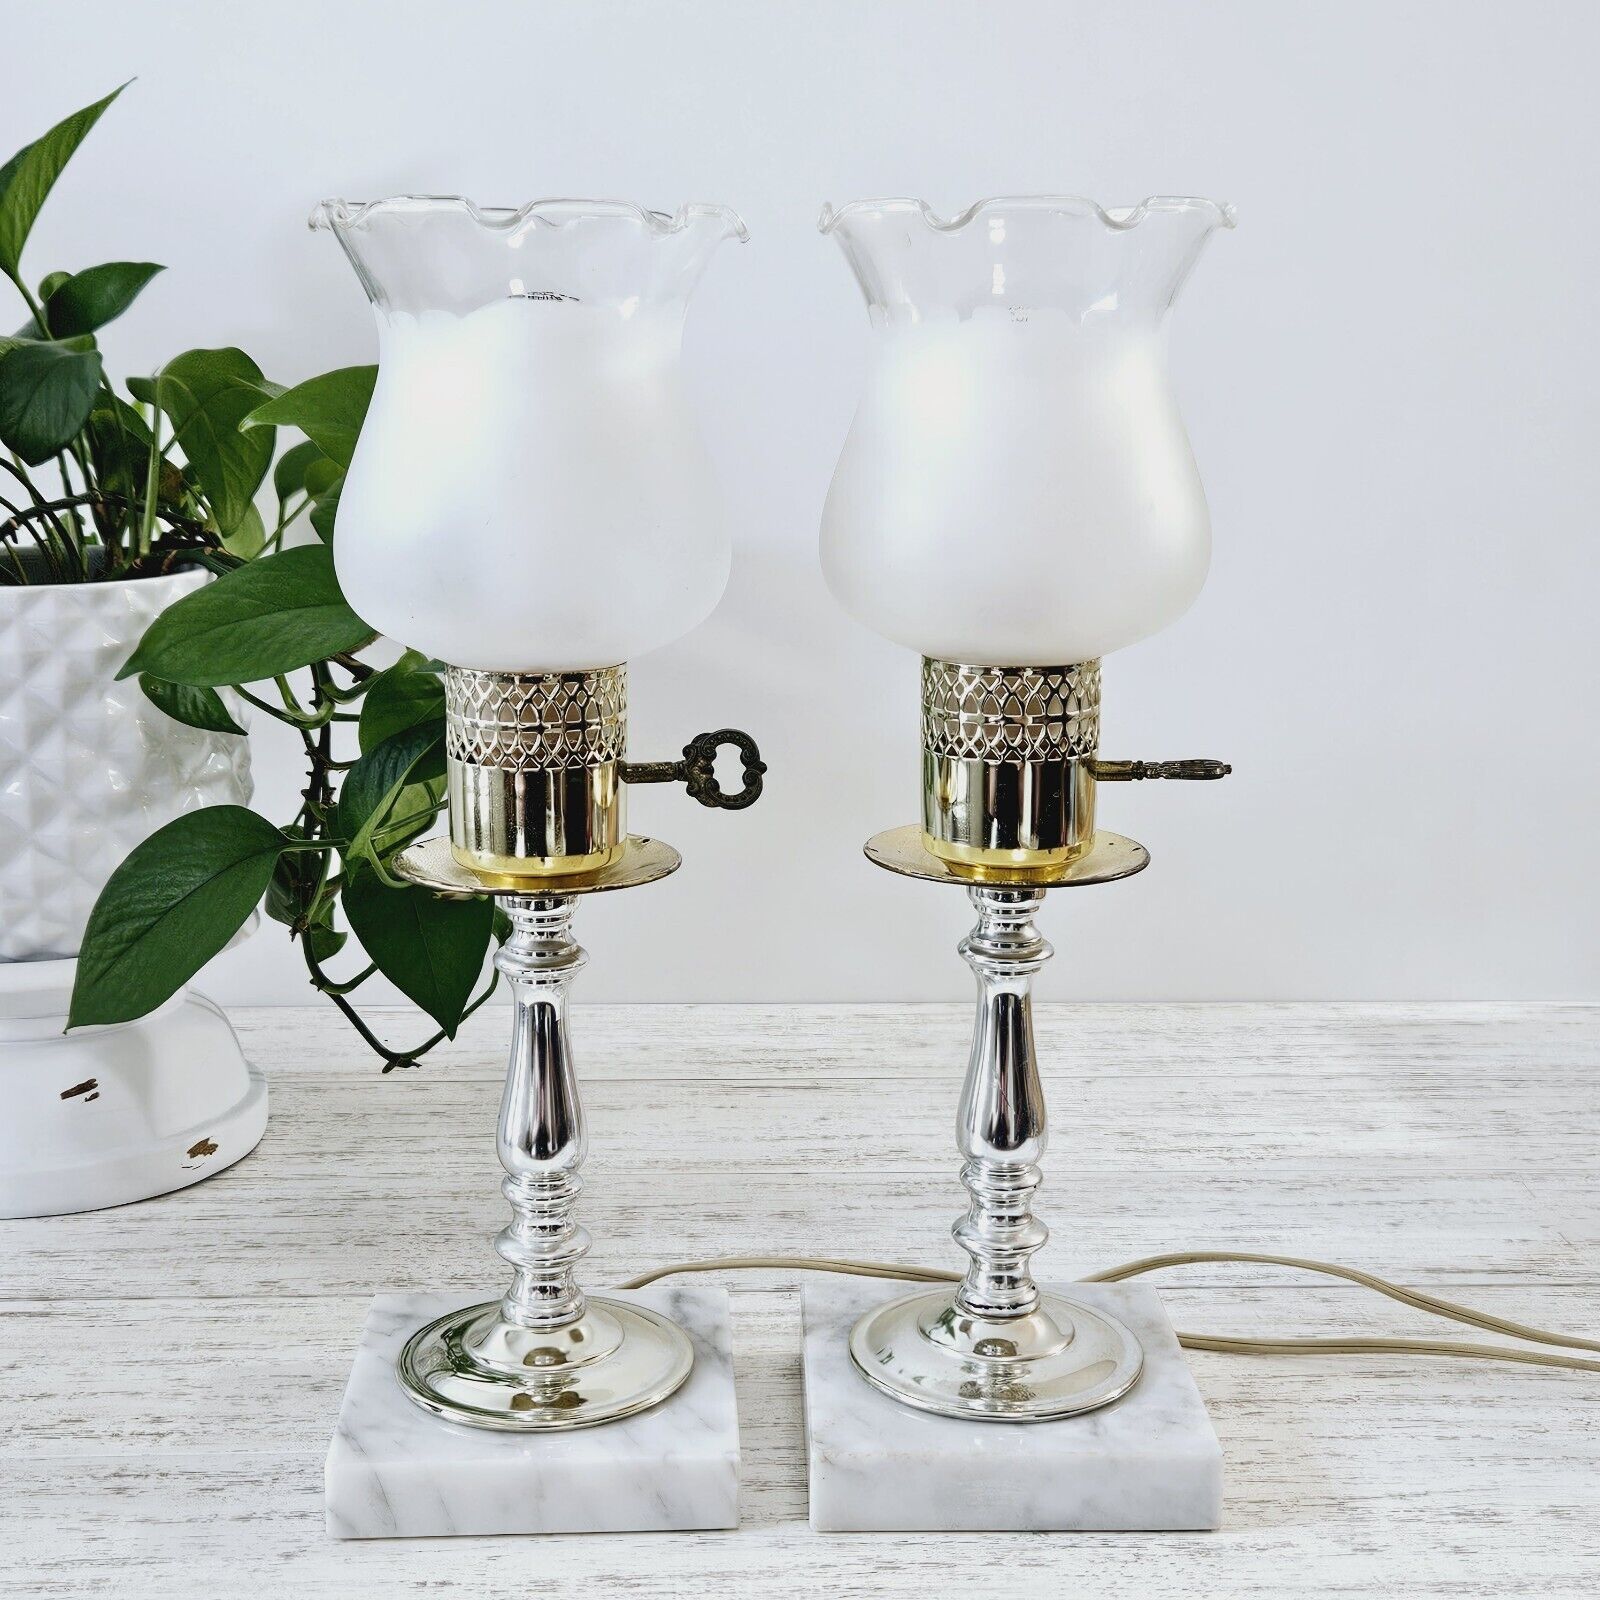 2 Vintage Lamps Table Top Molded White Glass Lamps on Marble Base